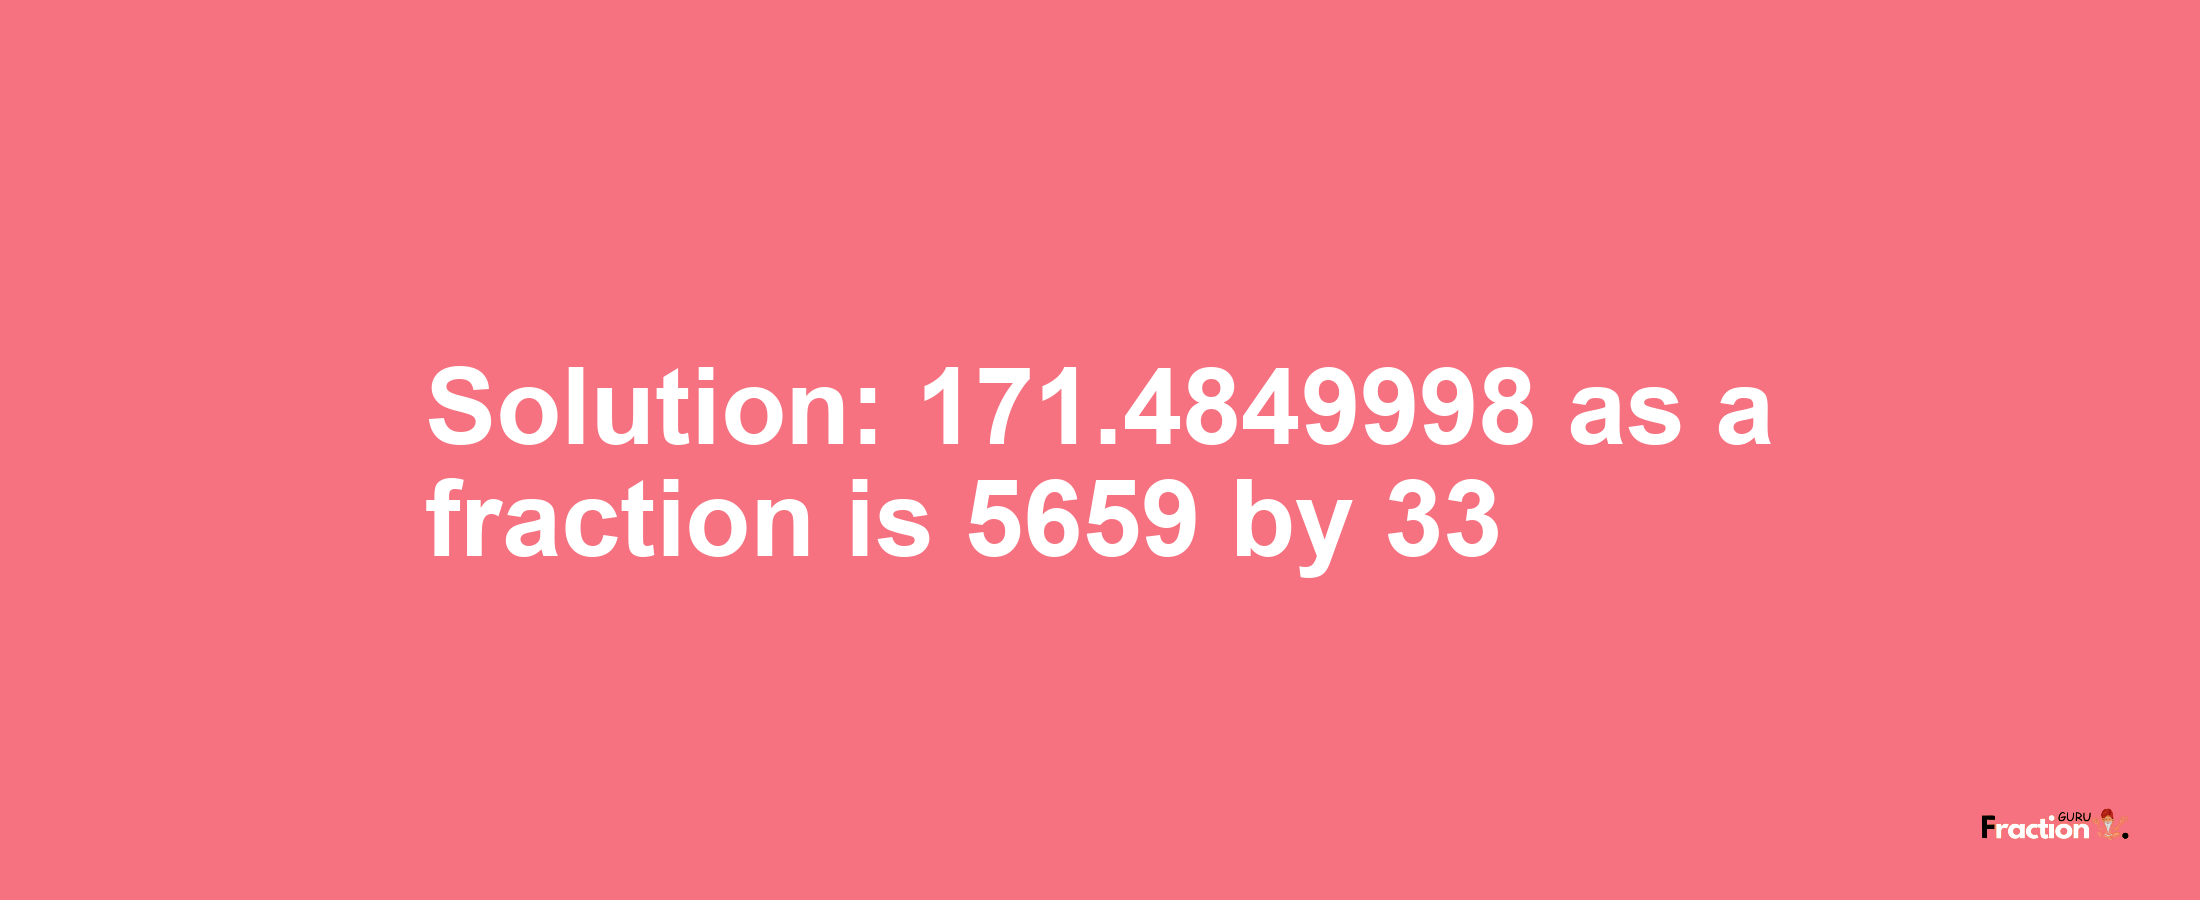 Solution:171.4849998 as a fraction is 5659/33